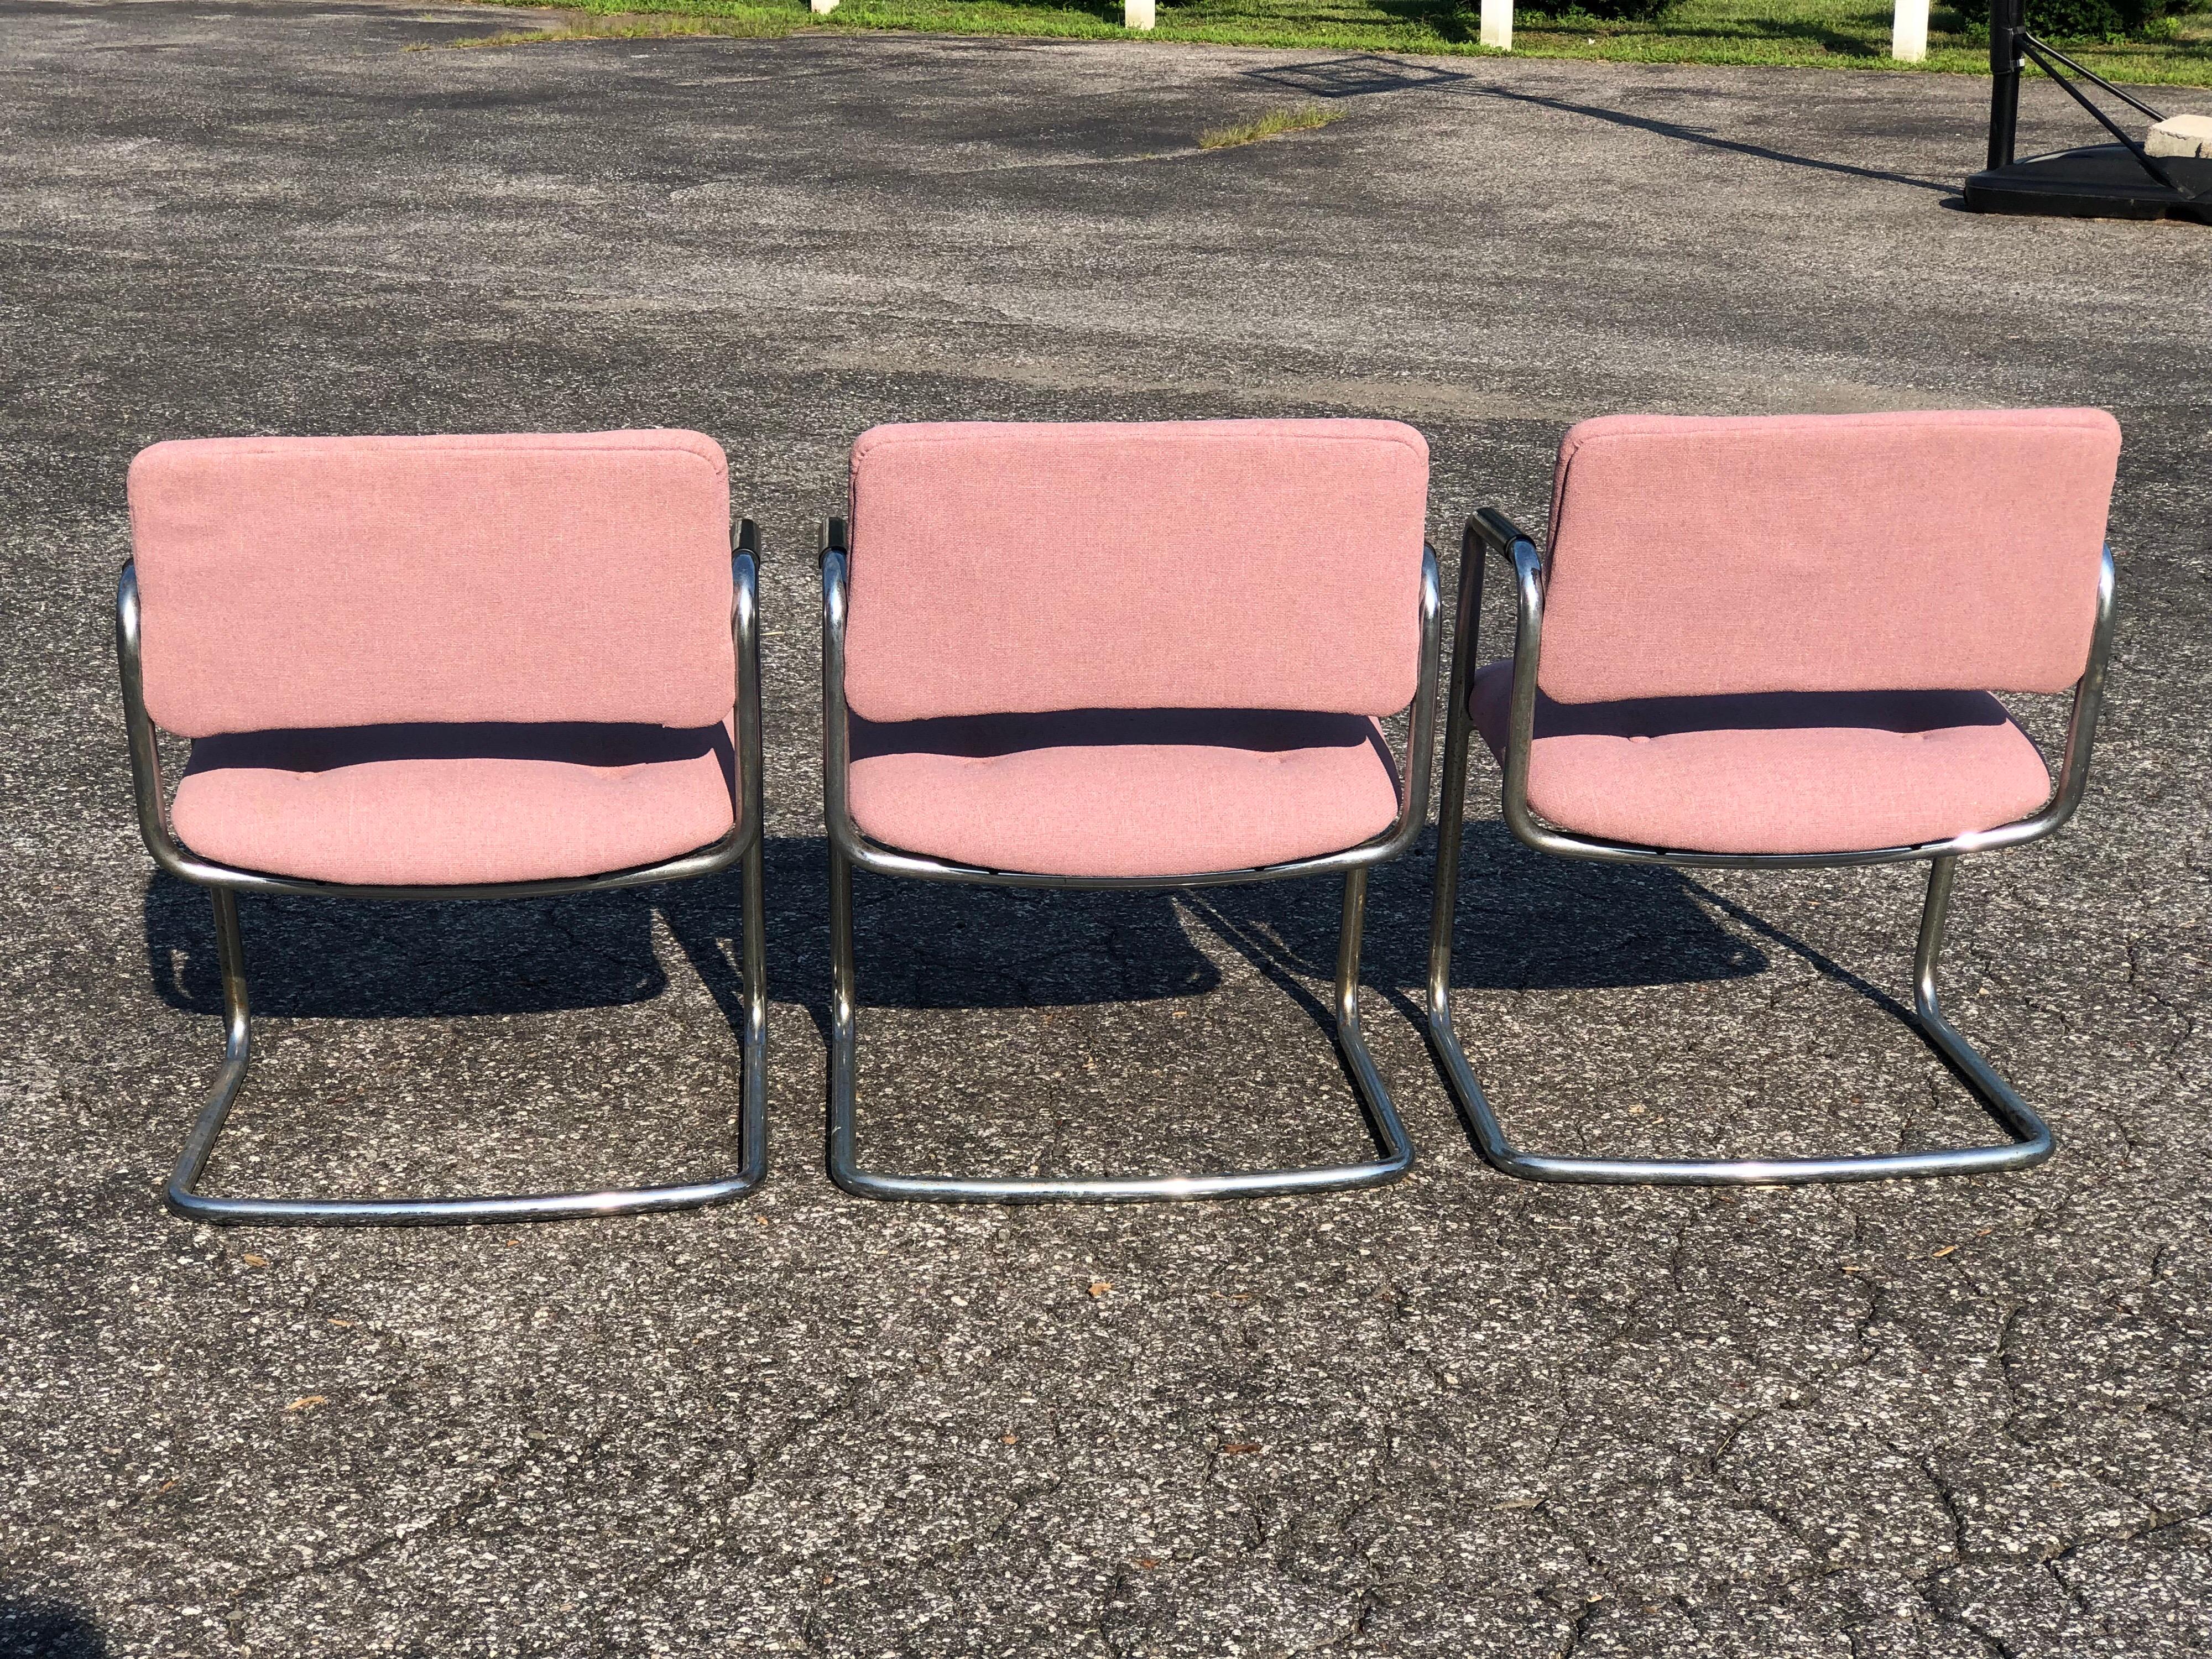 Upholstery Set of Three Chrome Steelcase Chairs in Plum